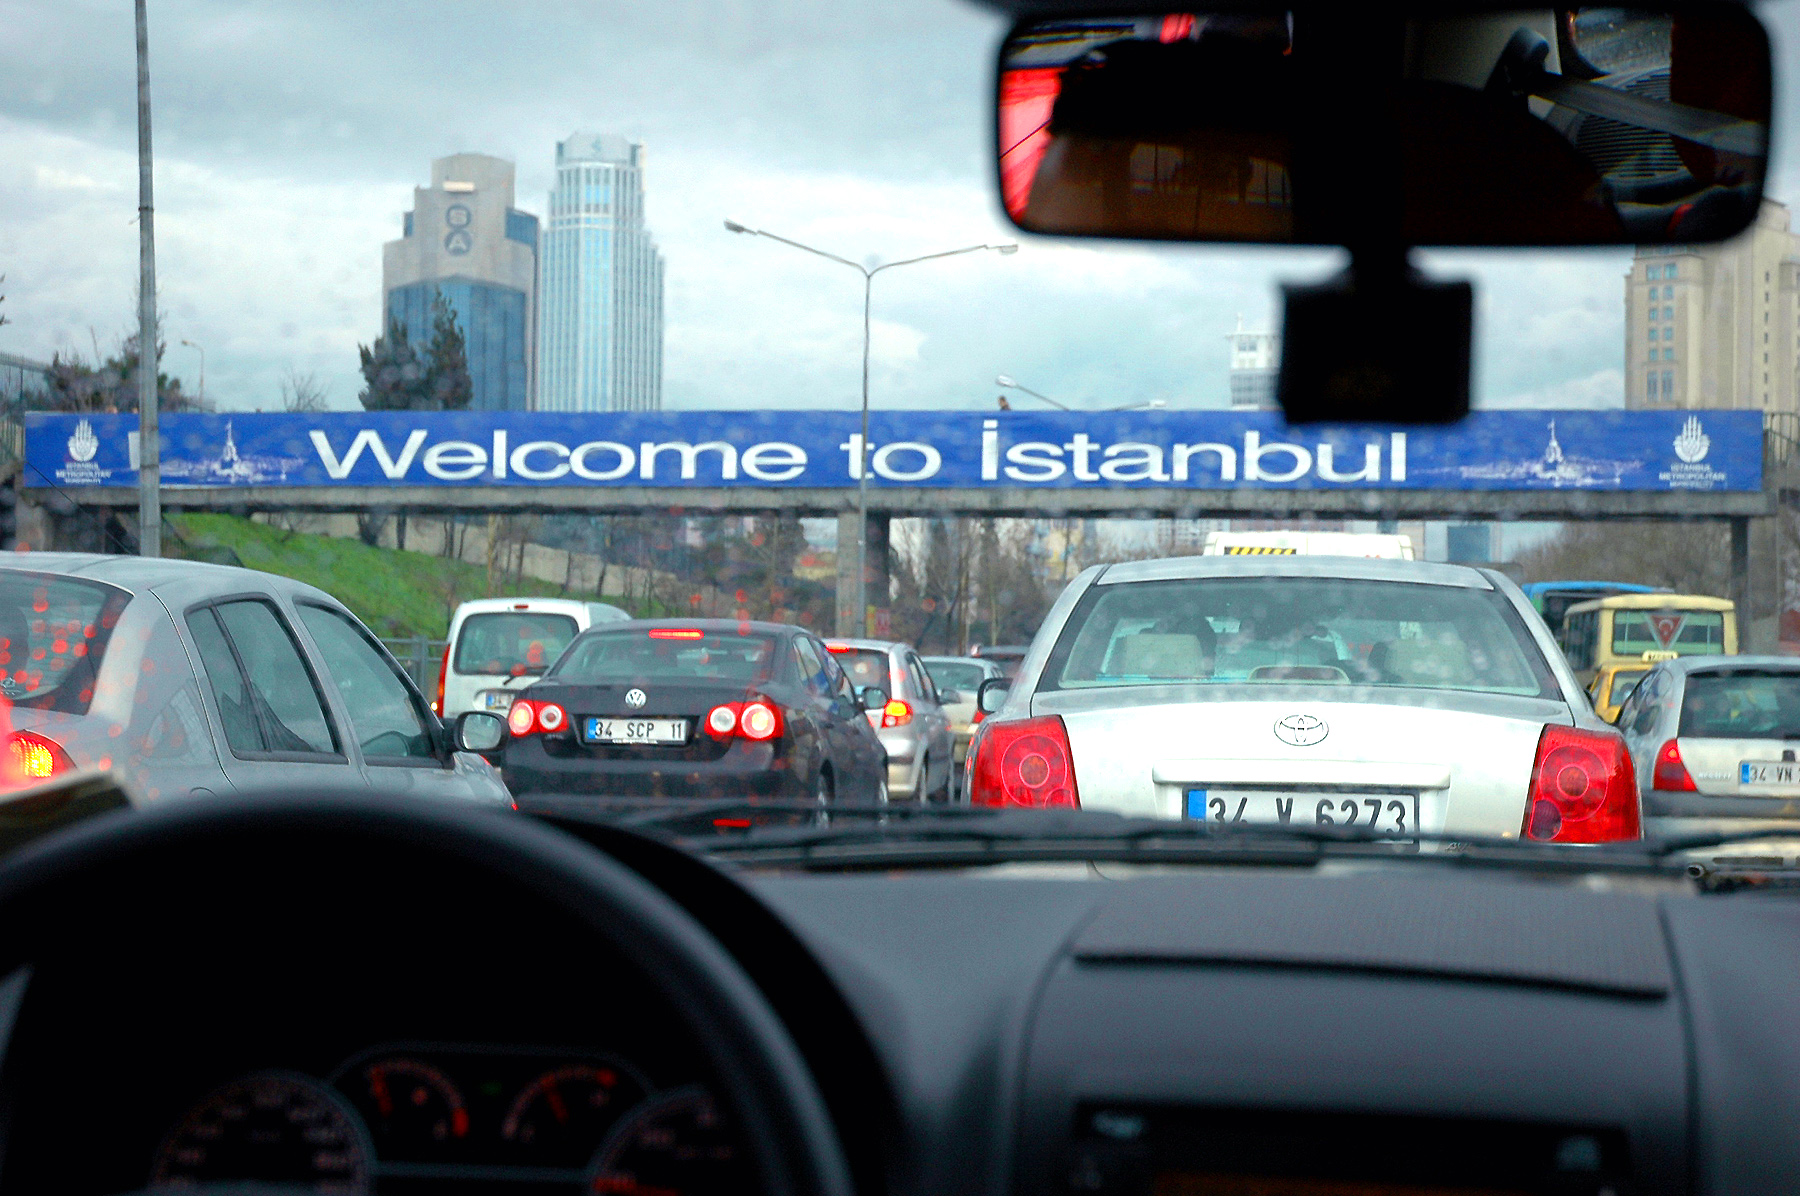 Eclipse 1999 - A10 - Welcome to Istanbul